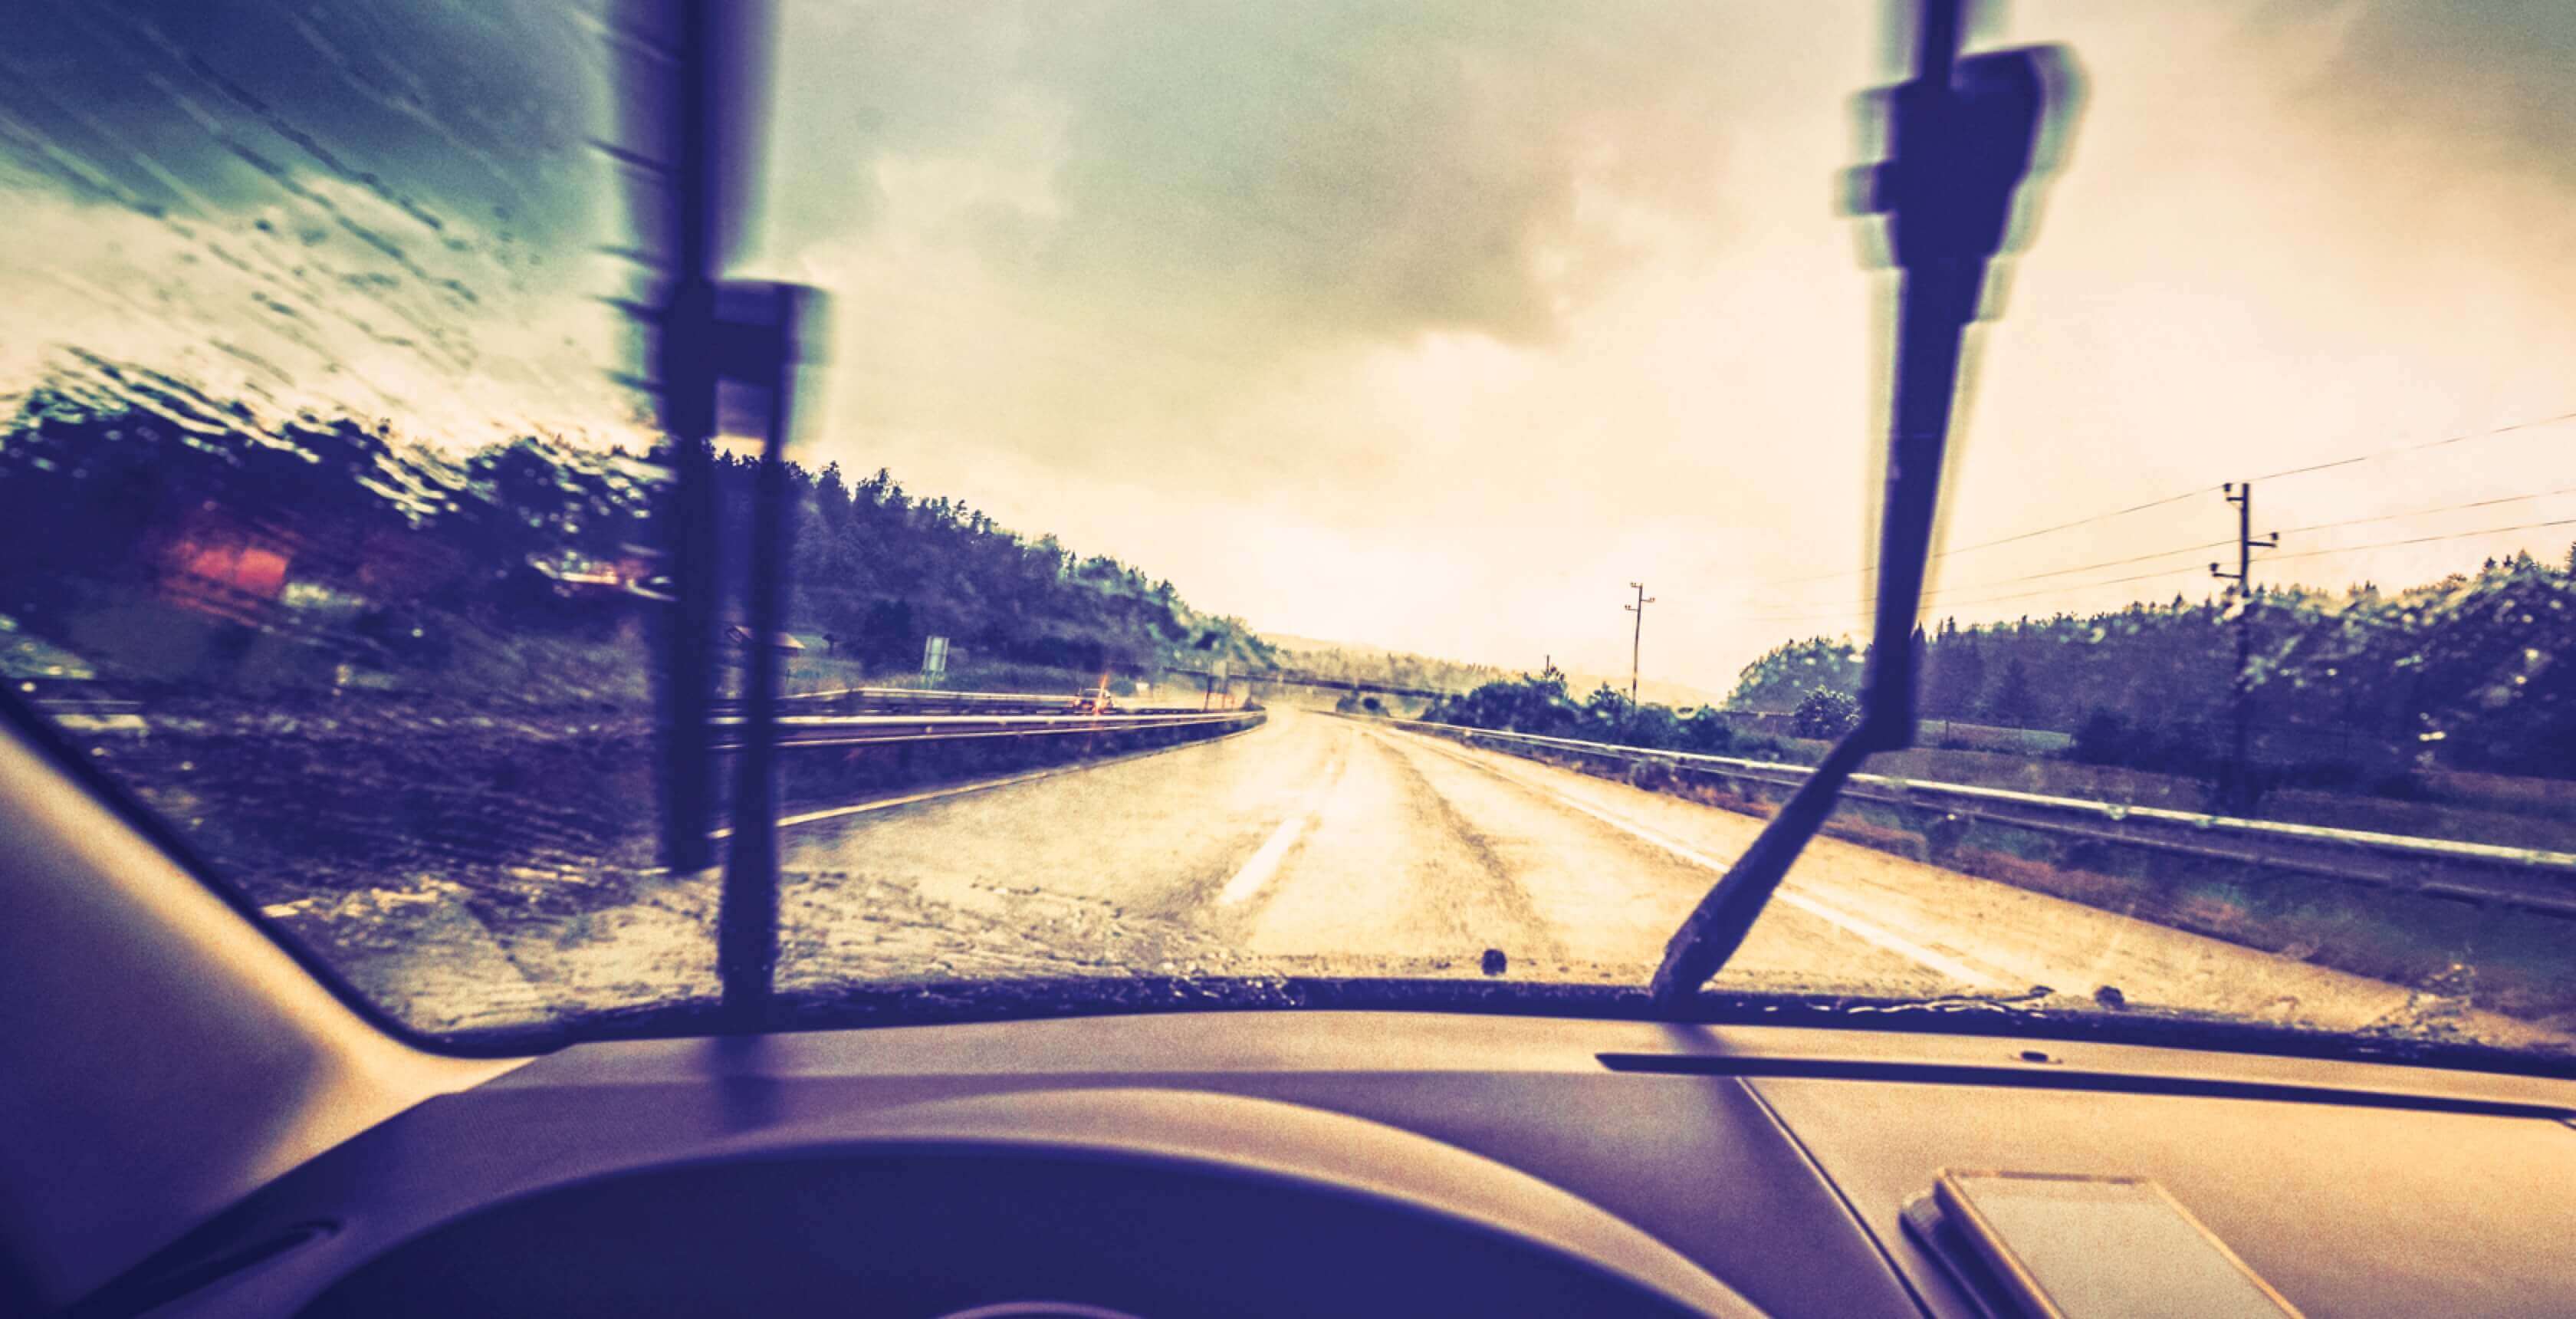 An image of a rain soaked windshield seen from the perspective of the driver